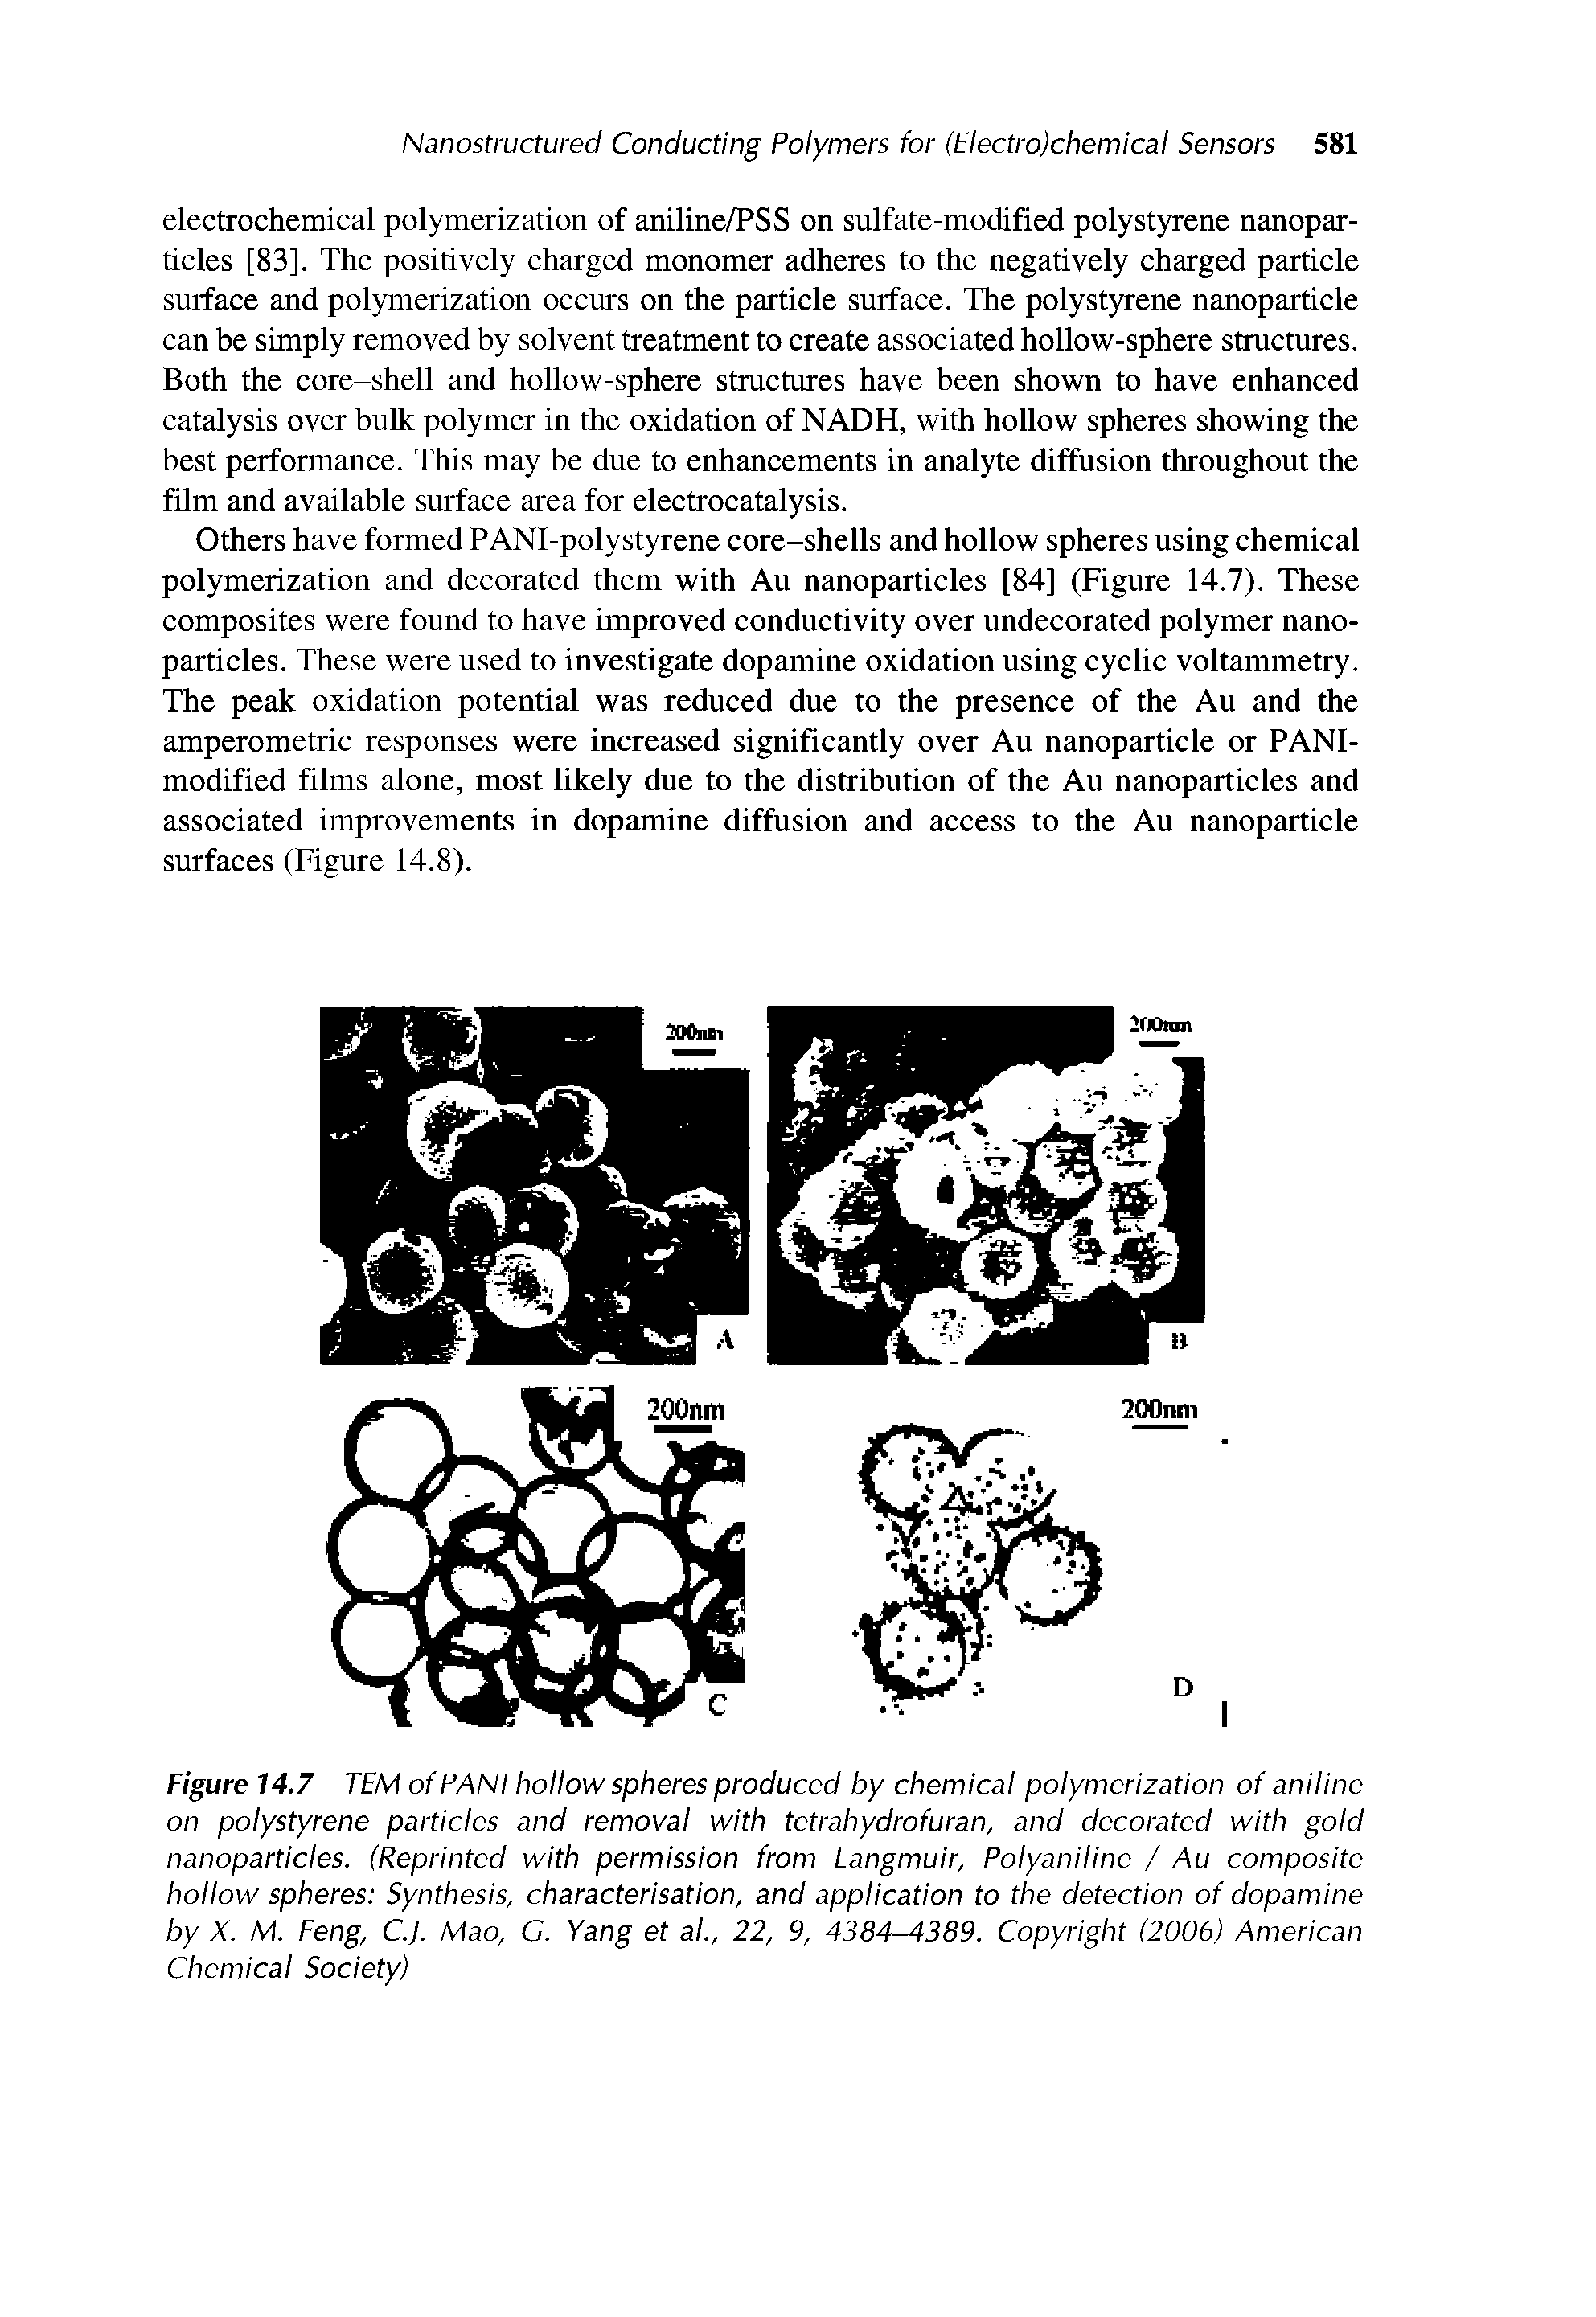 Figure 14.7 TEM ofPANI hollow spheres produced by chemical polymerization of aniline on polystyrene particles and removal with tetrahydrofuran, and decorated with gold nanoparticles. (Reprinted with permission from Langmuir, Polyaniline / Au composite hollow spheres Synthesis, characterisation, and application to the detection of dopamine by X. M. Feng, C.J. Mao, C. Yang et al., 22, 9, 4384-4389. Copyright (2006) American Chemical Society)...